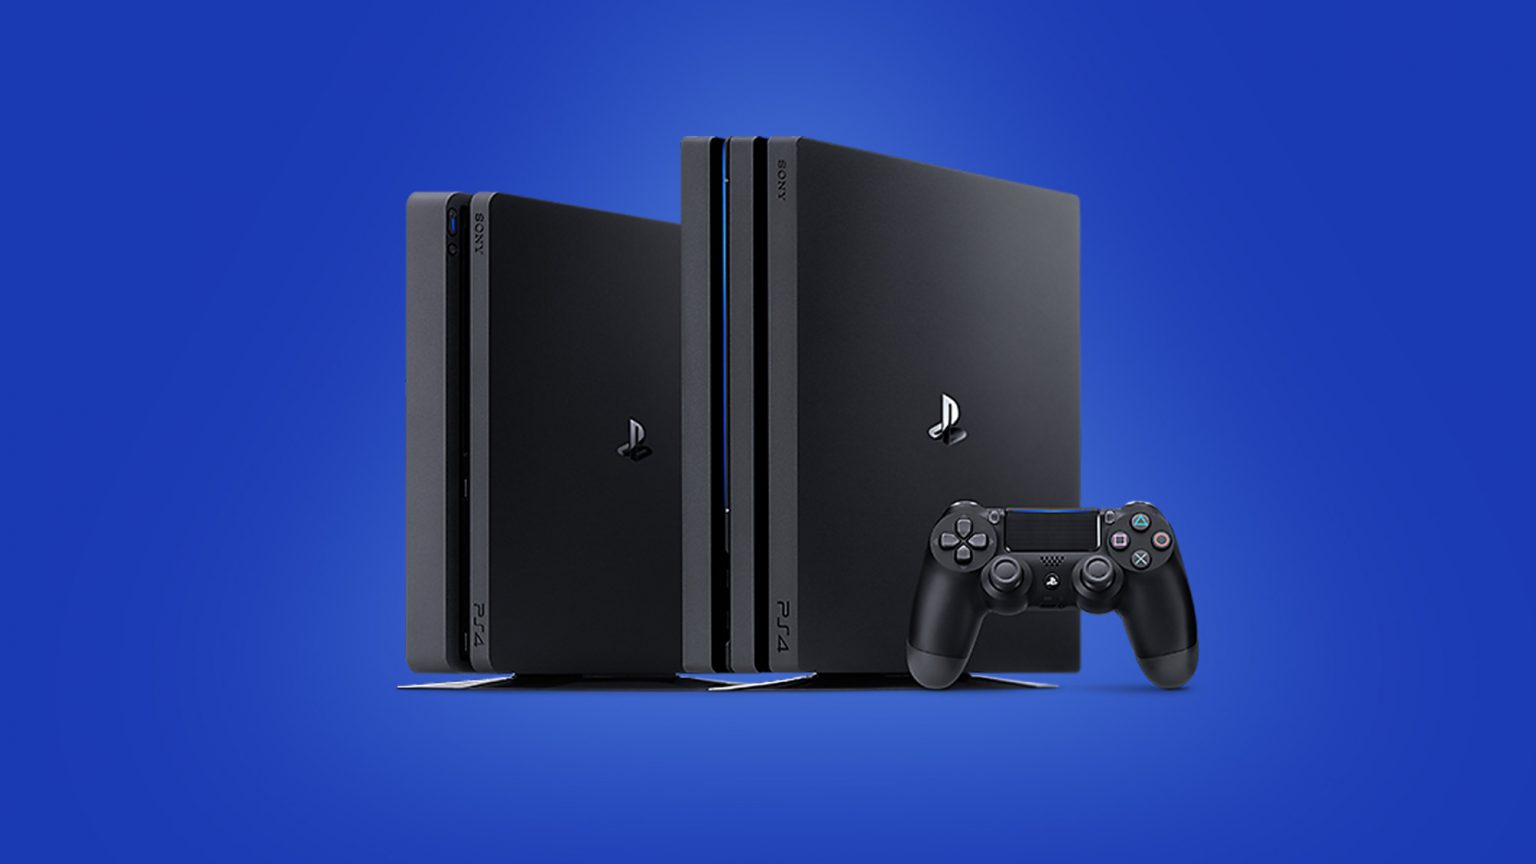 How Much Does a Ps4 Cost on Black Friday? 2021